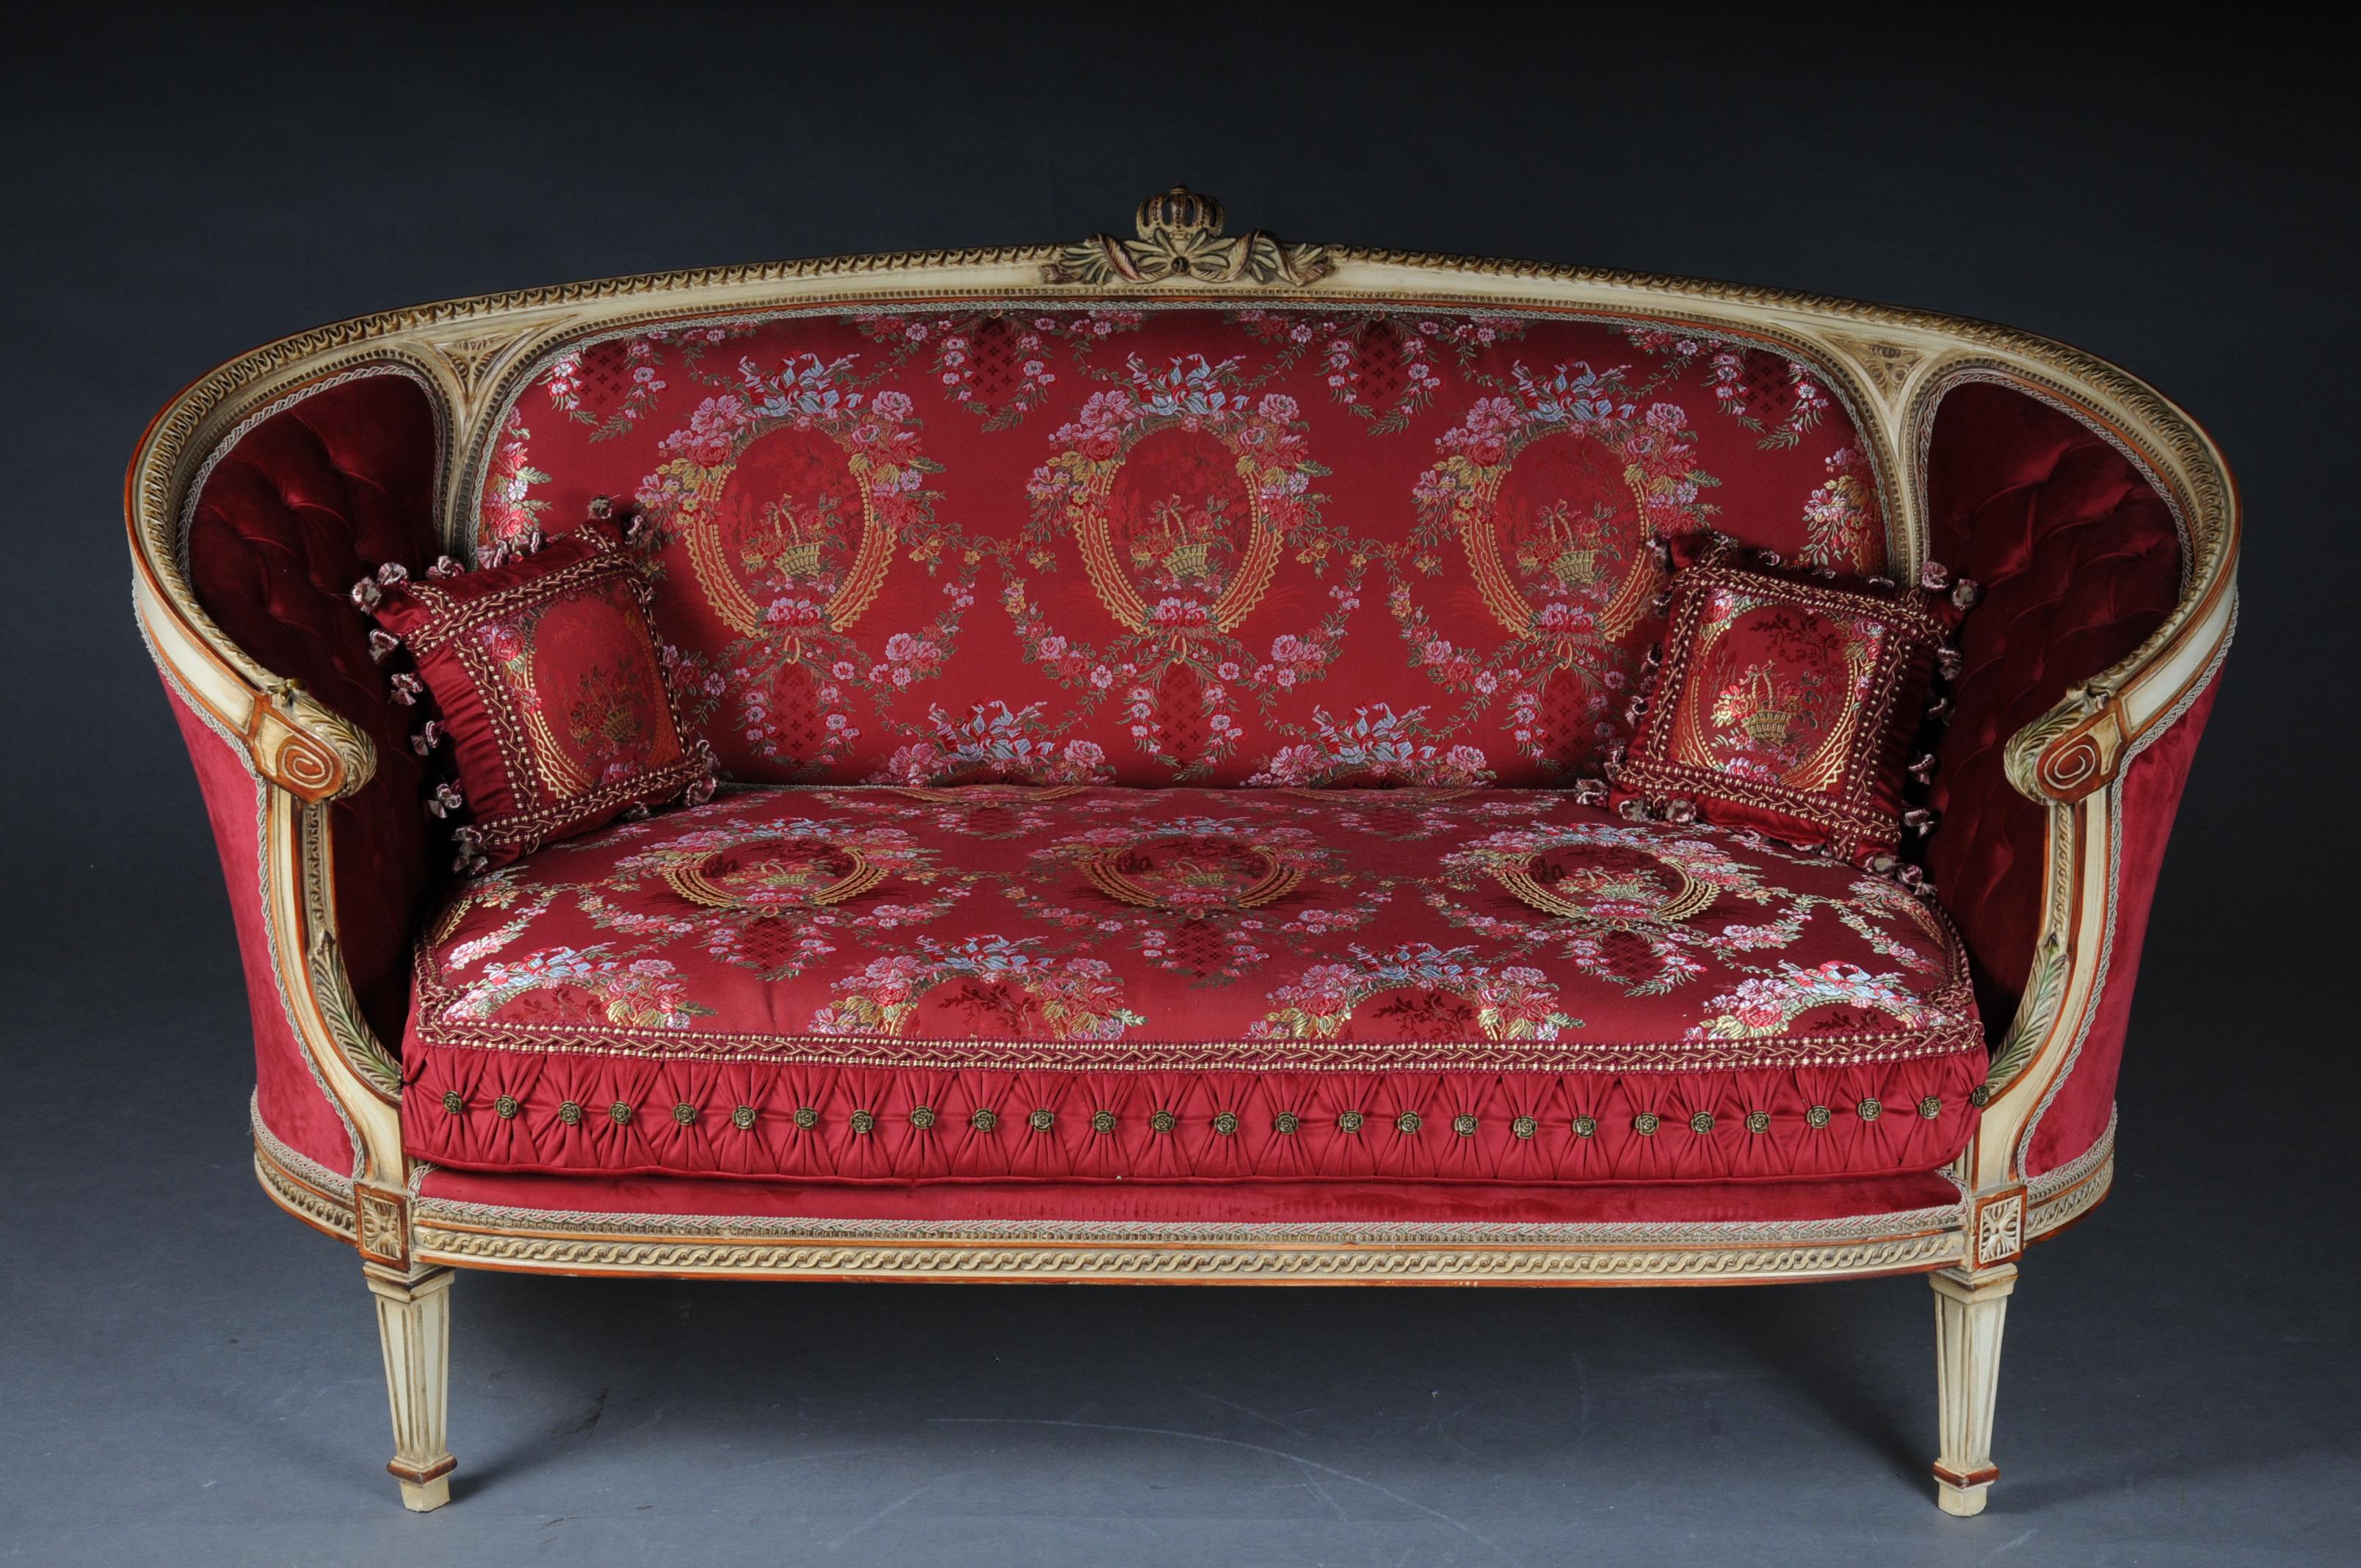 Unique seating, sofa set with oval table in Louis XVI Seize

Solid beech wood, carved and gilded. Semicircular rising backrest framing with rocaille crowning. Seat and backrest are finished with a historical, Classic upholstery. The ensemble